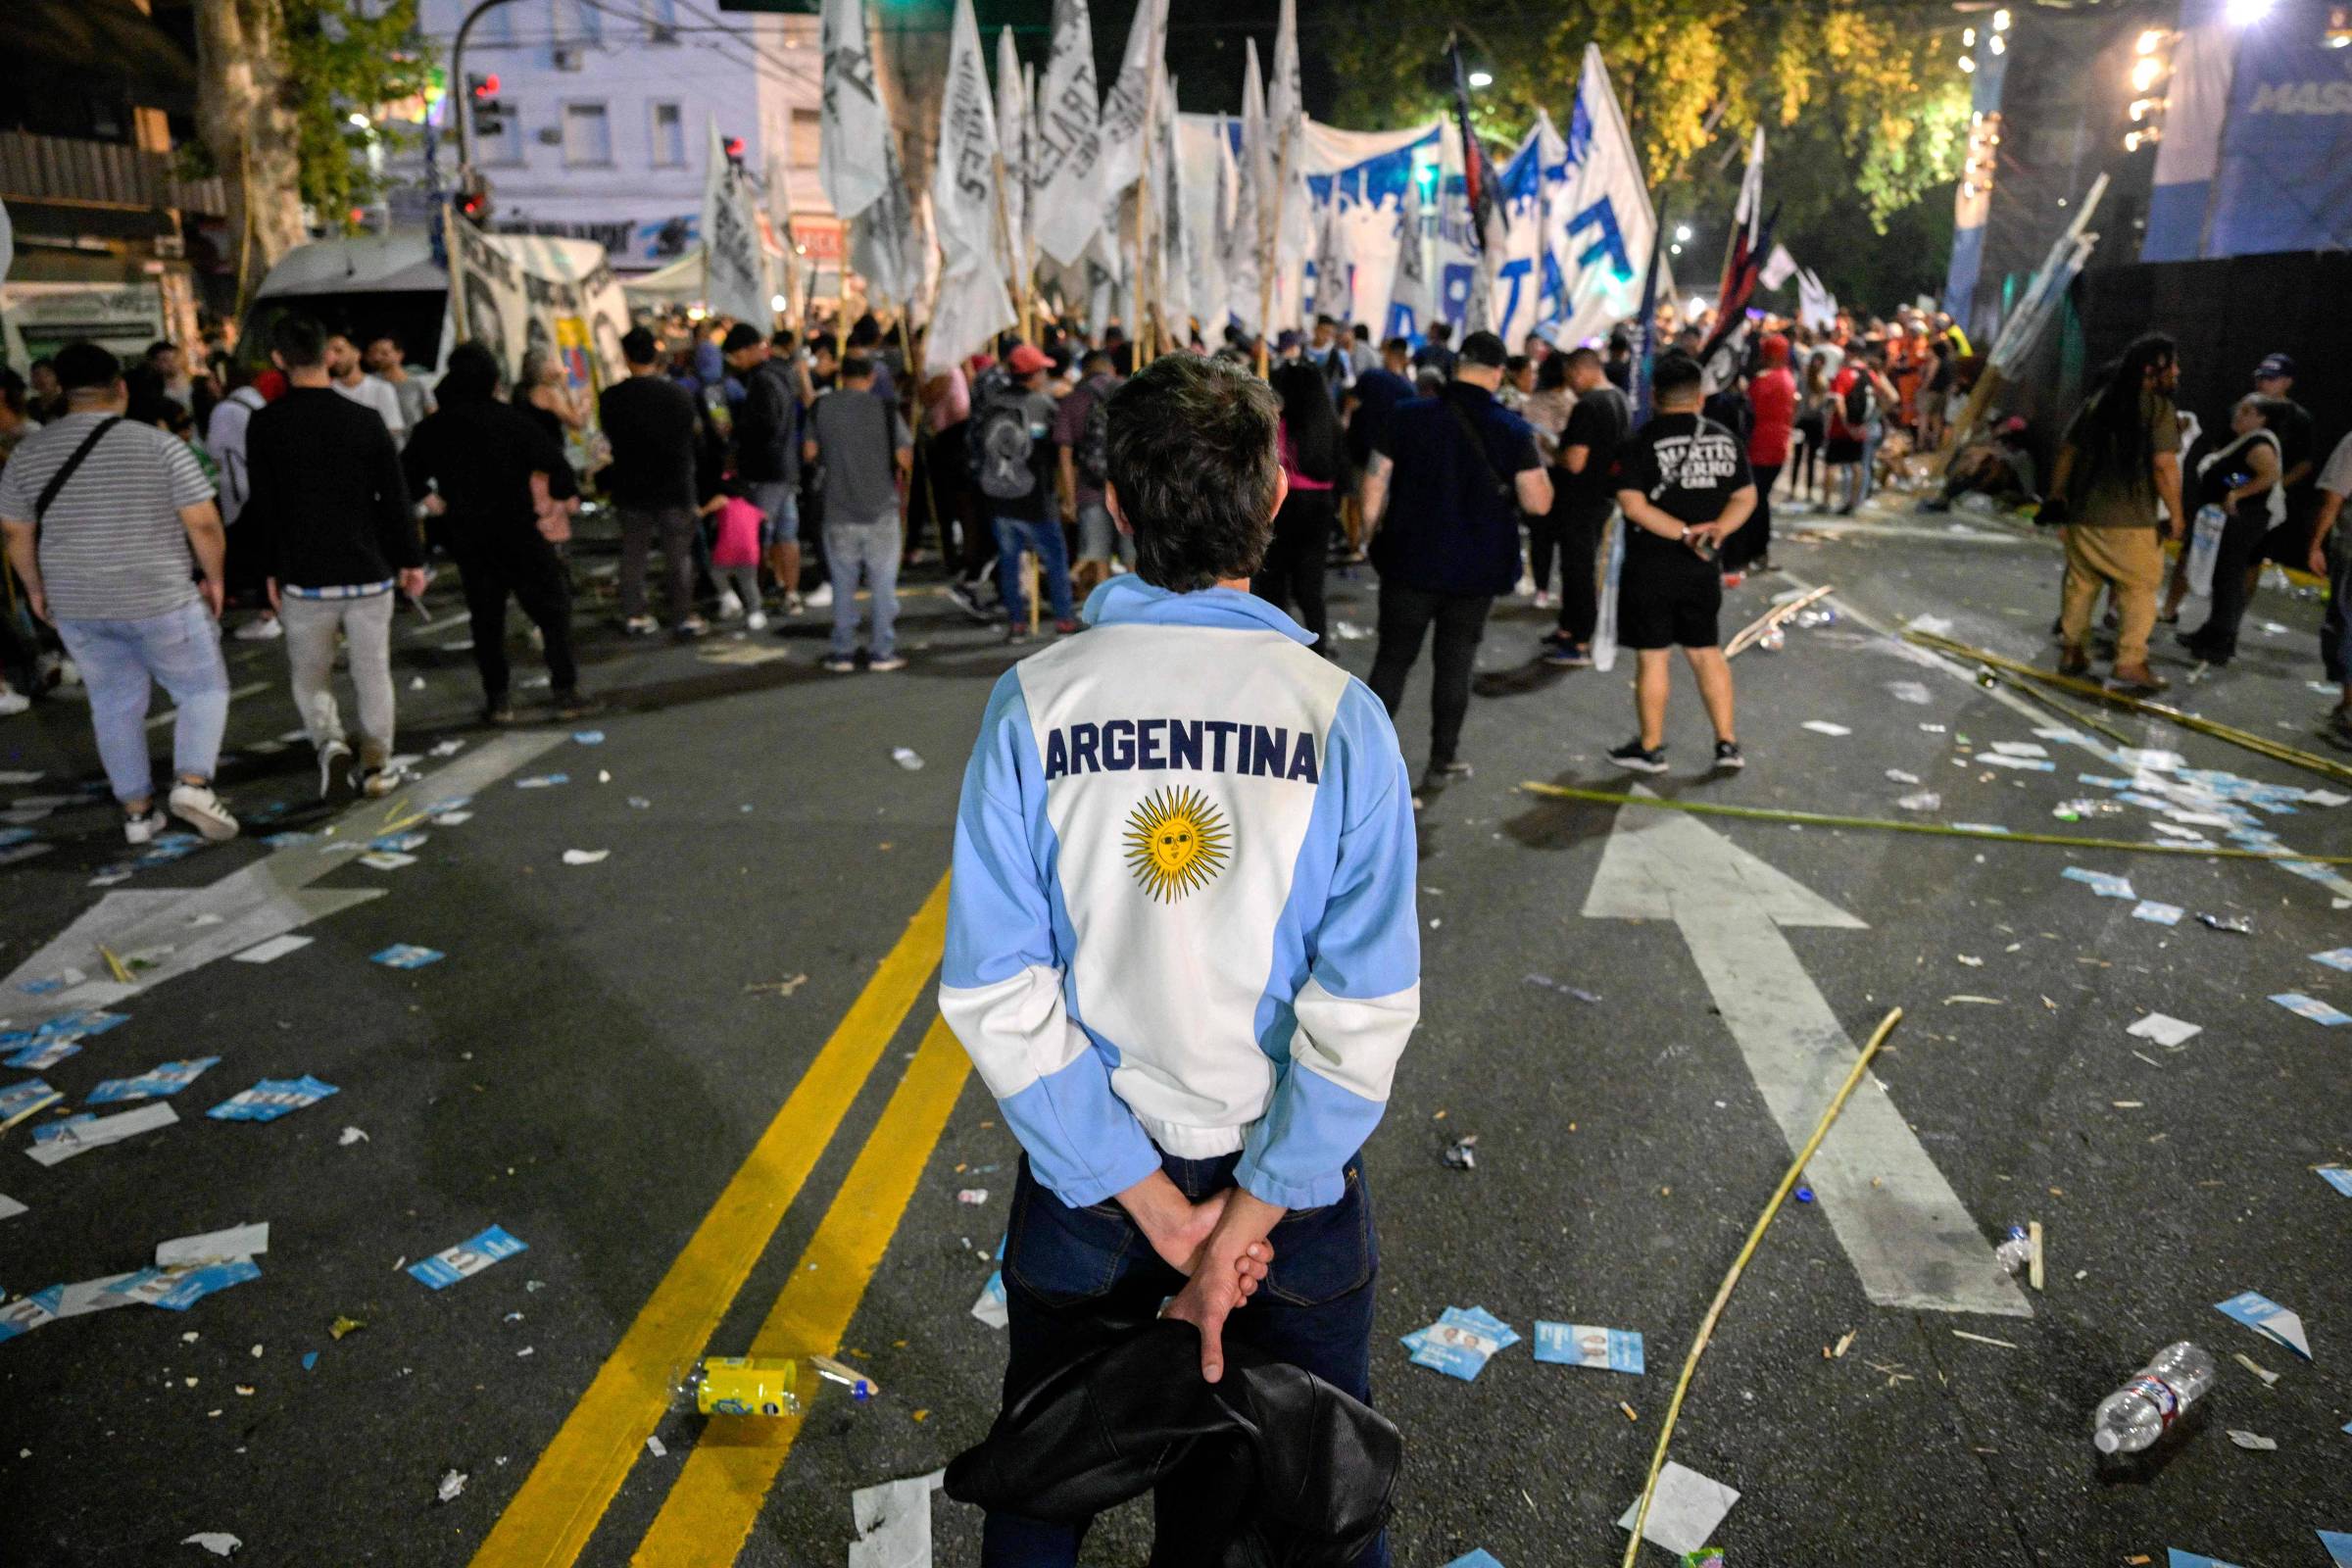 Analysis: Milei’s election still does not define Argentina’s economic or political future